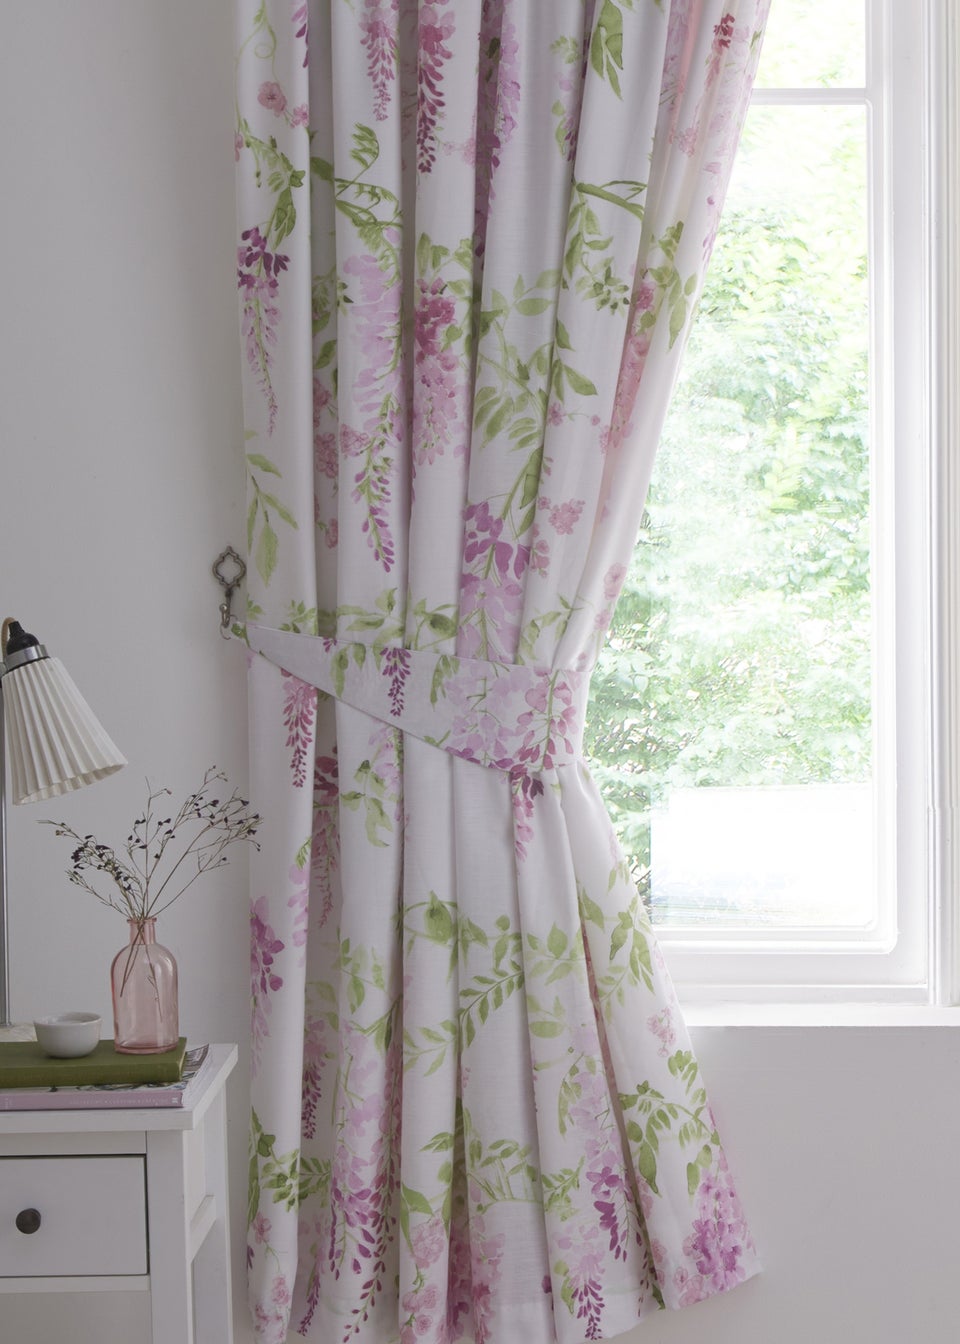 Dreams & Drapes Wisteria Pink Pencil Pleat Curtains With Tie-Backs